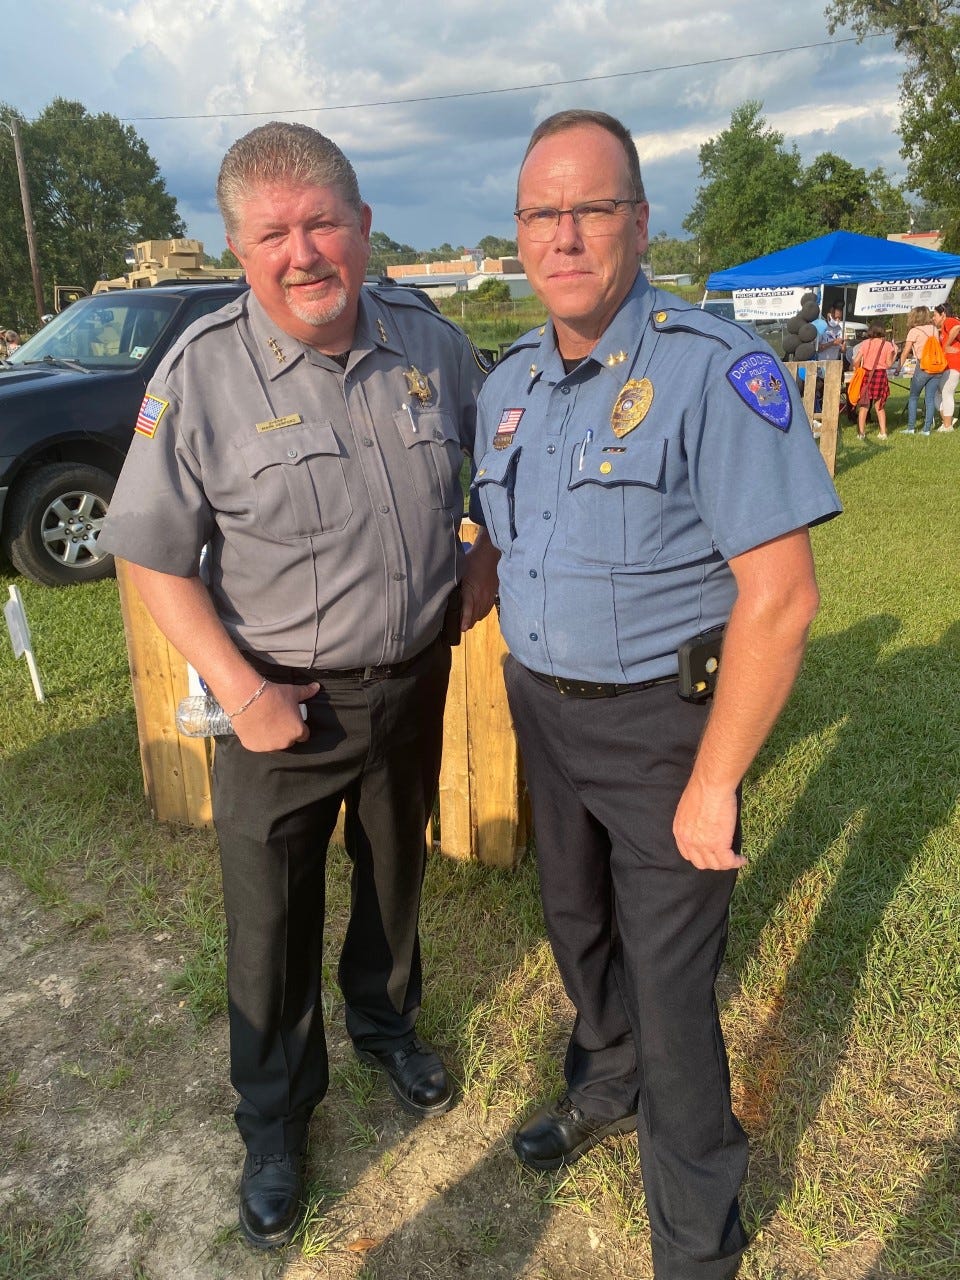 Beauregard Parish Sheriff Mark Herford and DeRidder Police Chief Craig Richard were meeting and greeting all those in attendance at National Night Out.